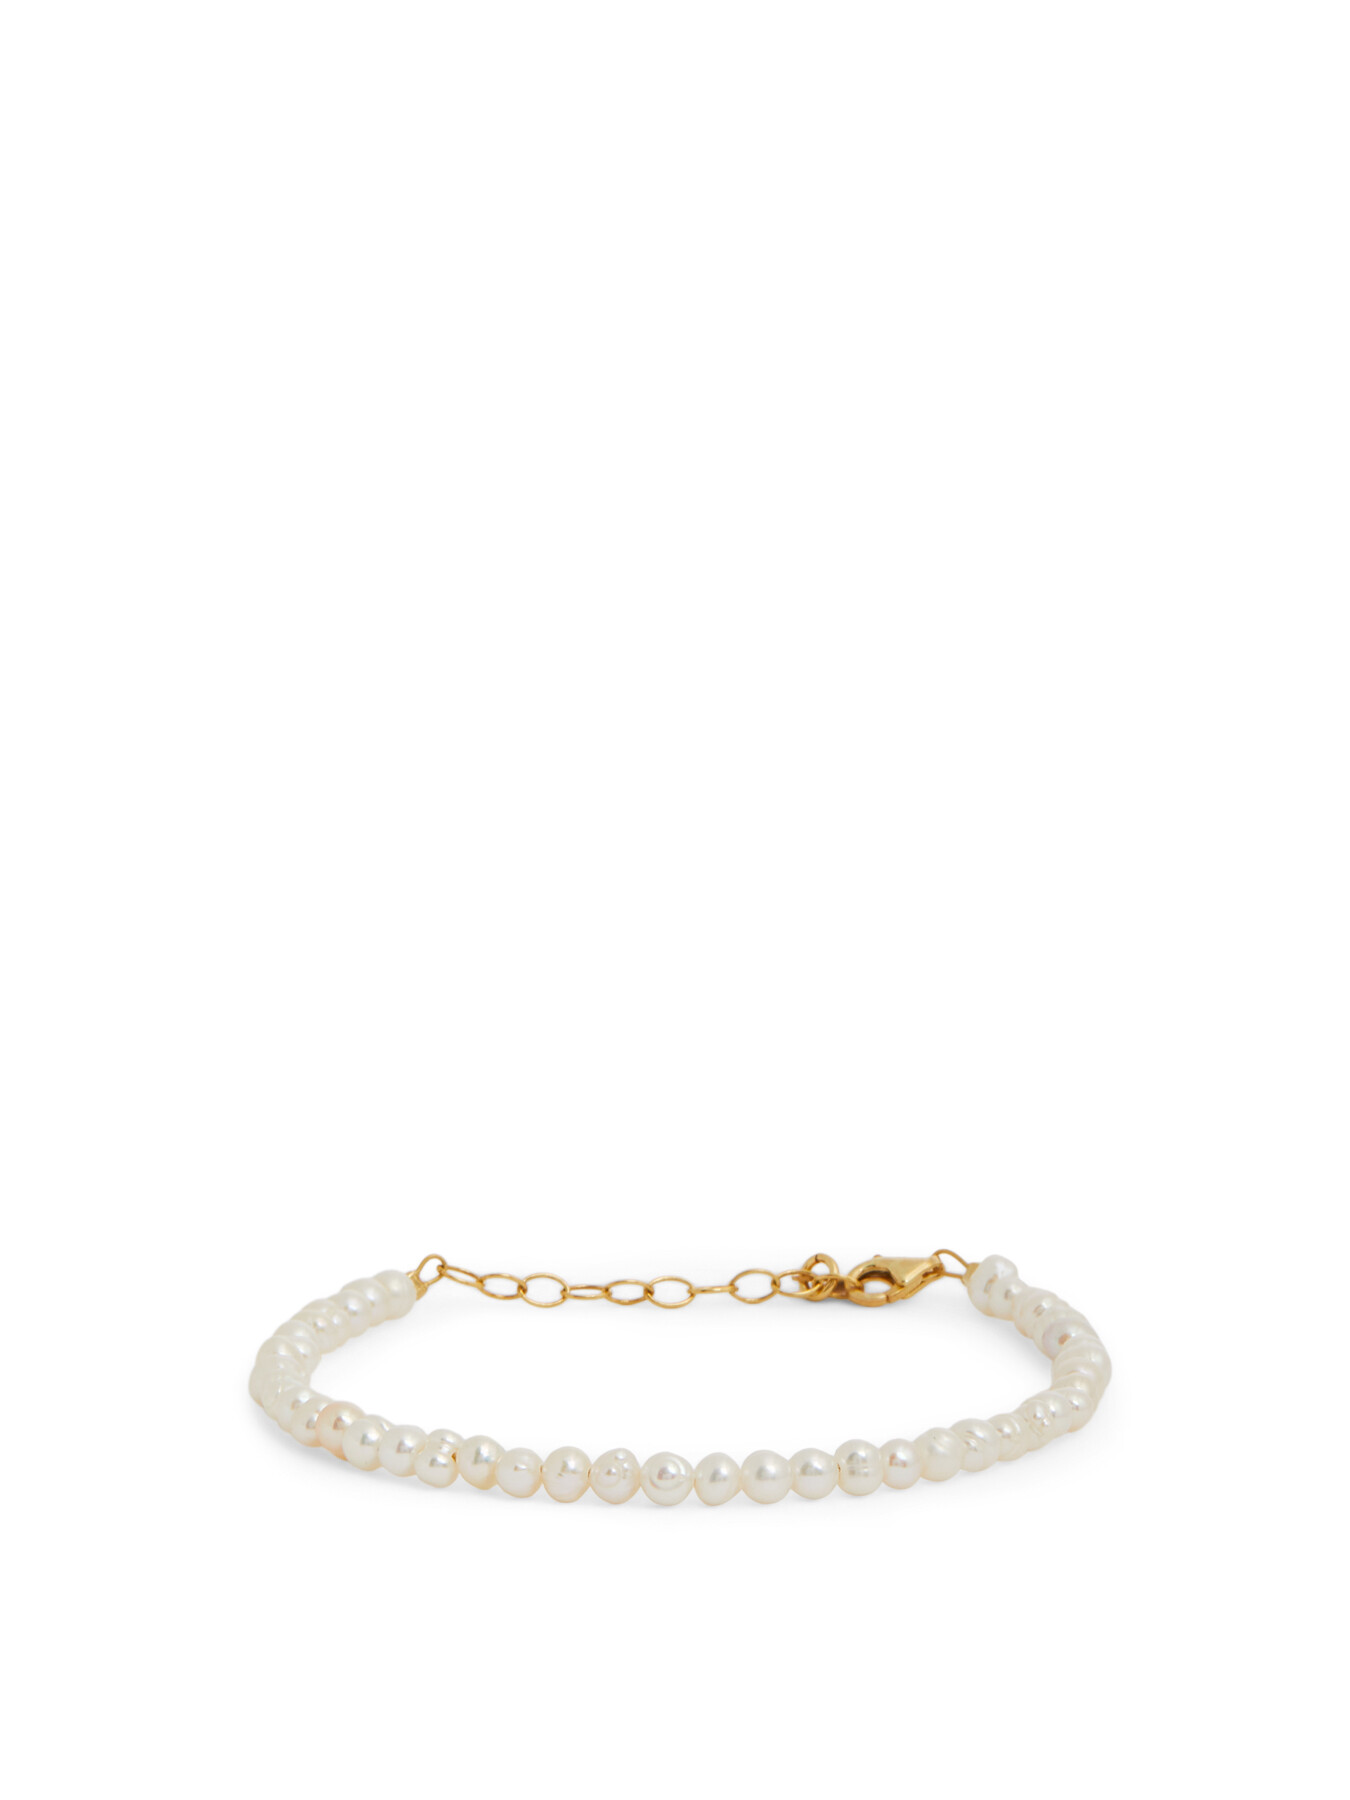 Gold Antique Pearl and Diamond Bracelet | AC Silver